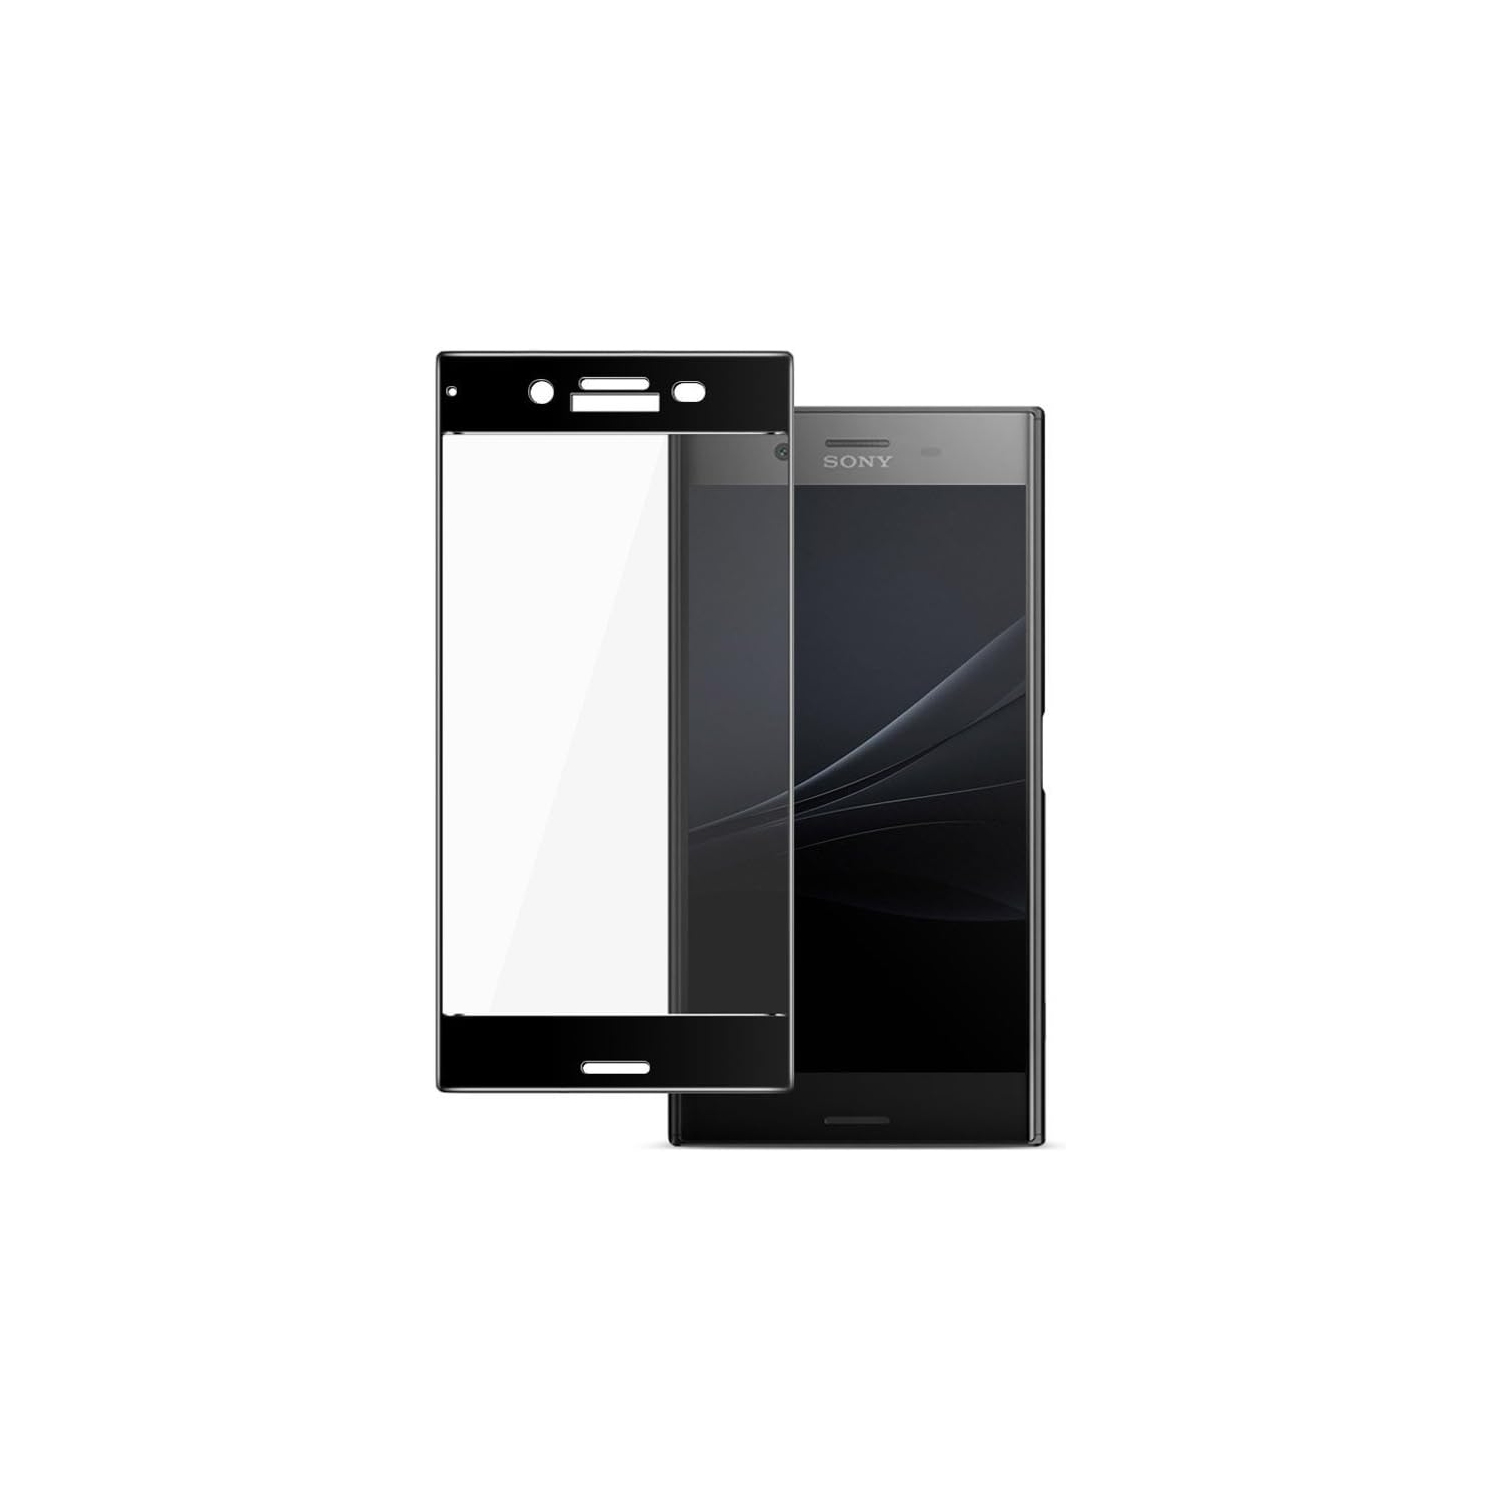 Sony Xperia XZ Premium Screen Protector,Full Coverage 9H Hardness Tempered Glass Screen Protector for Sony Xperia XZ